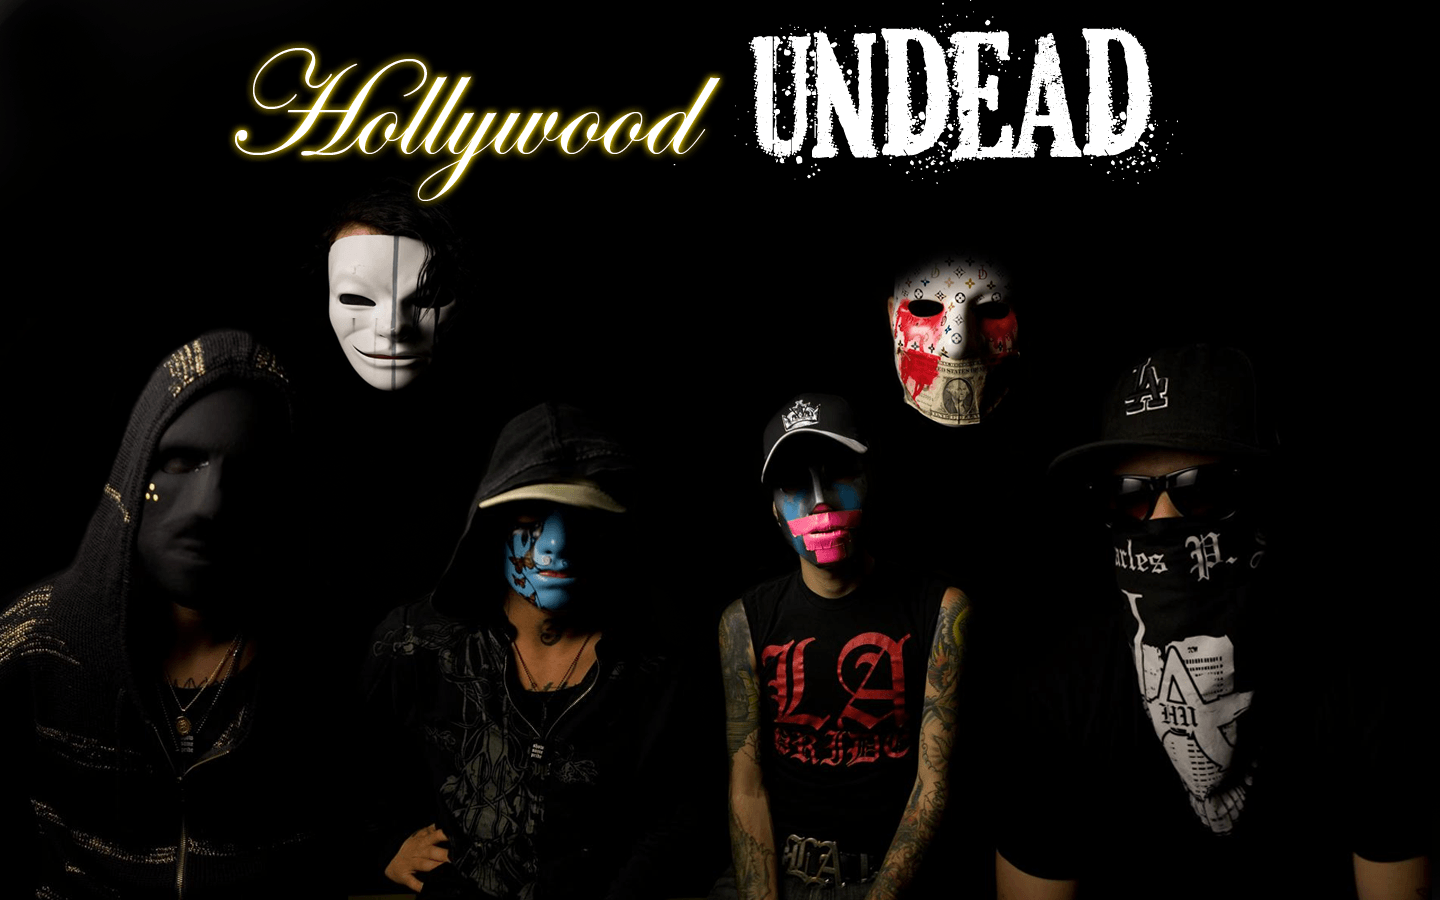 Hollywood Undead Background